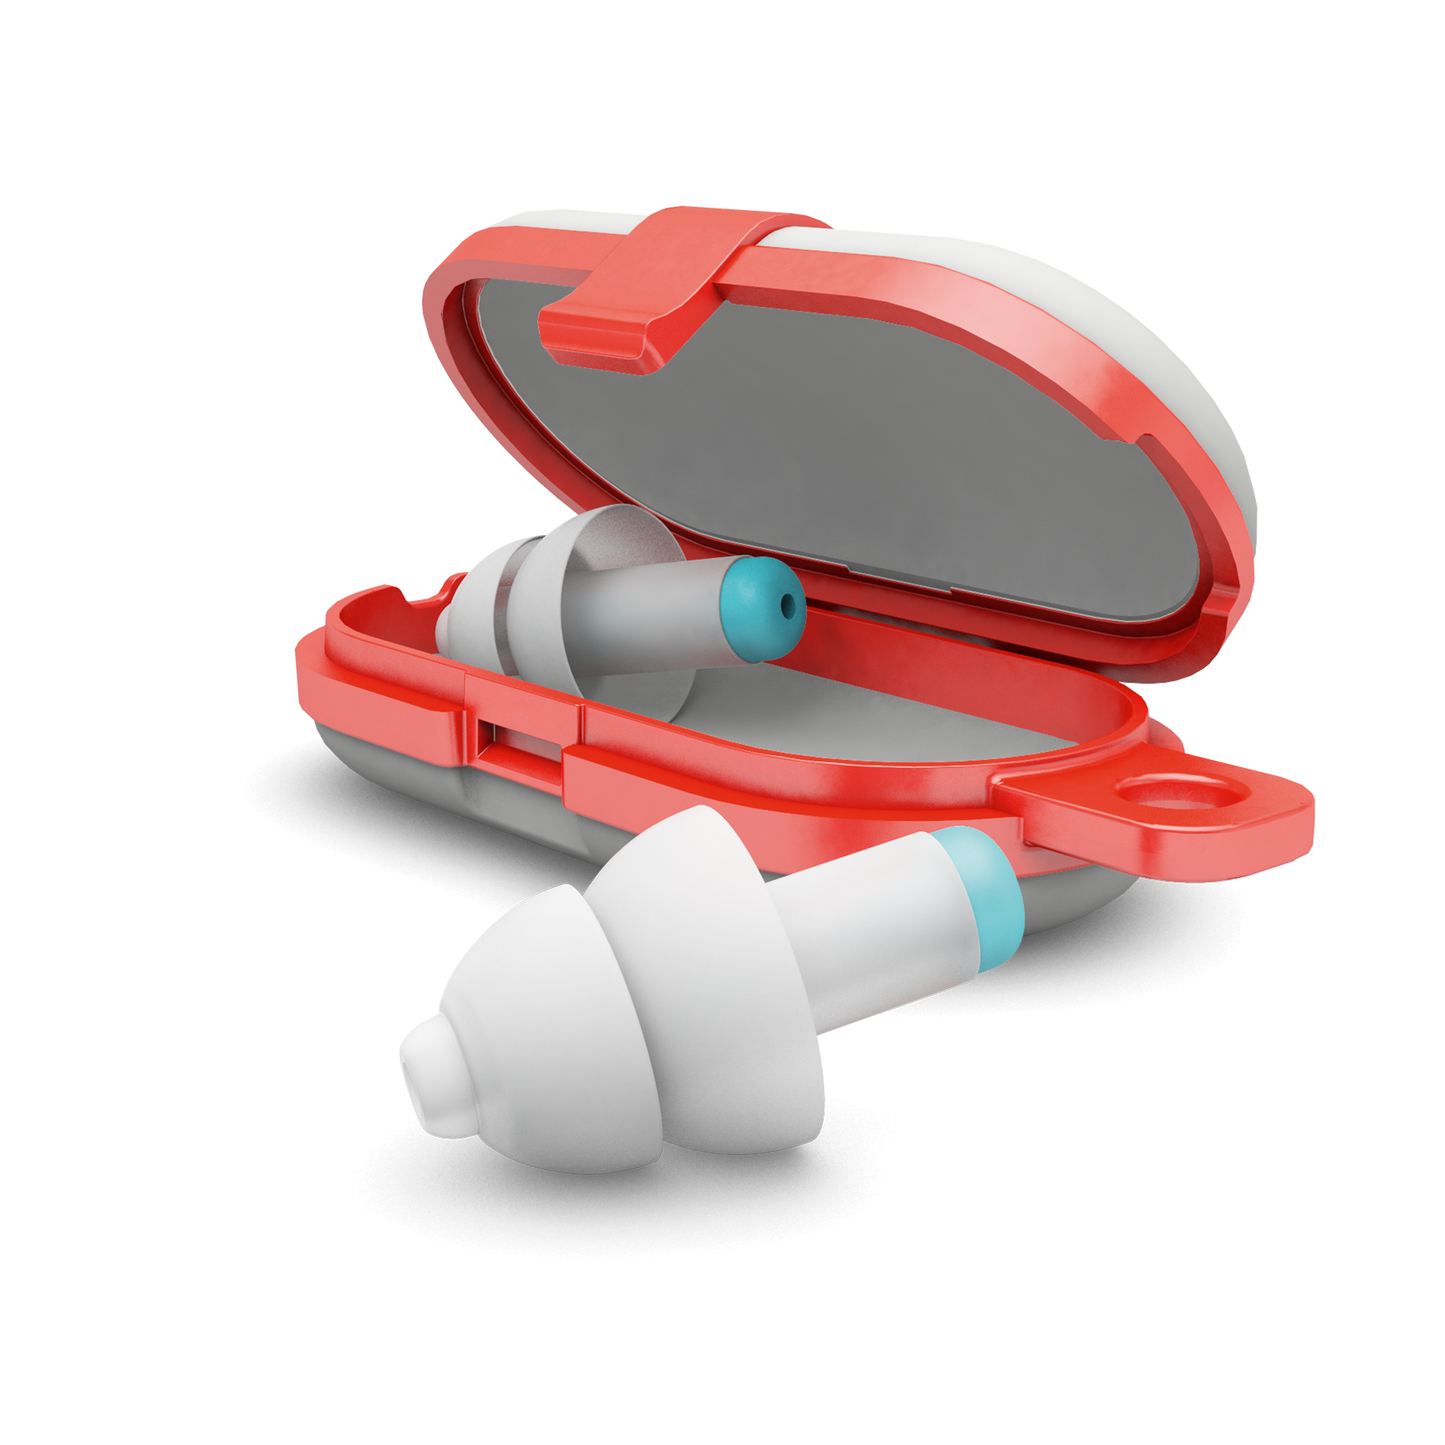 Alpine Pluggies Kids protects the ears specifically Alpine hearing protection Earplugs earmuffs protect your ear red dot award Muffy Baby Muffy Kids Pluggies Kids